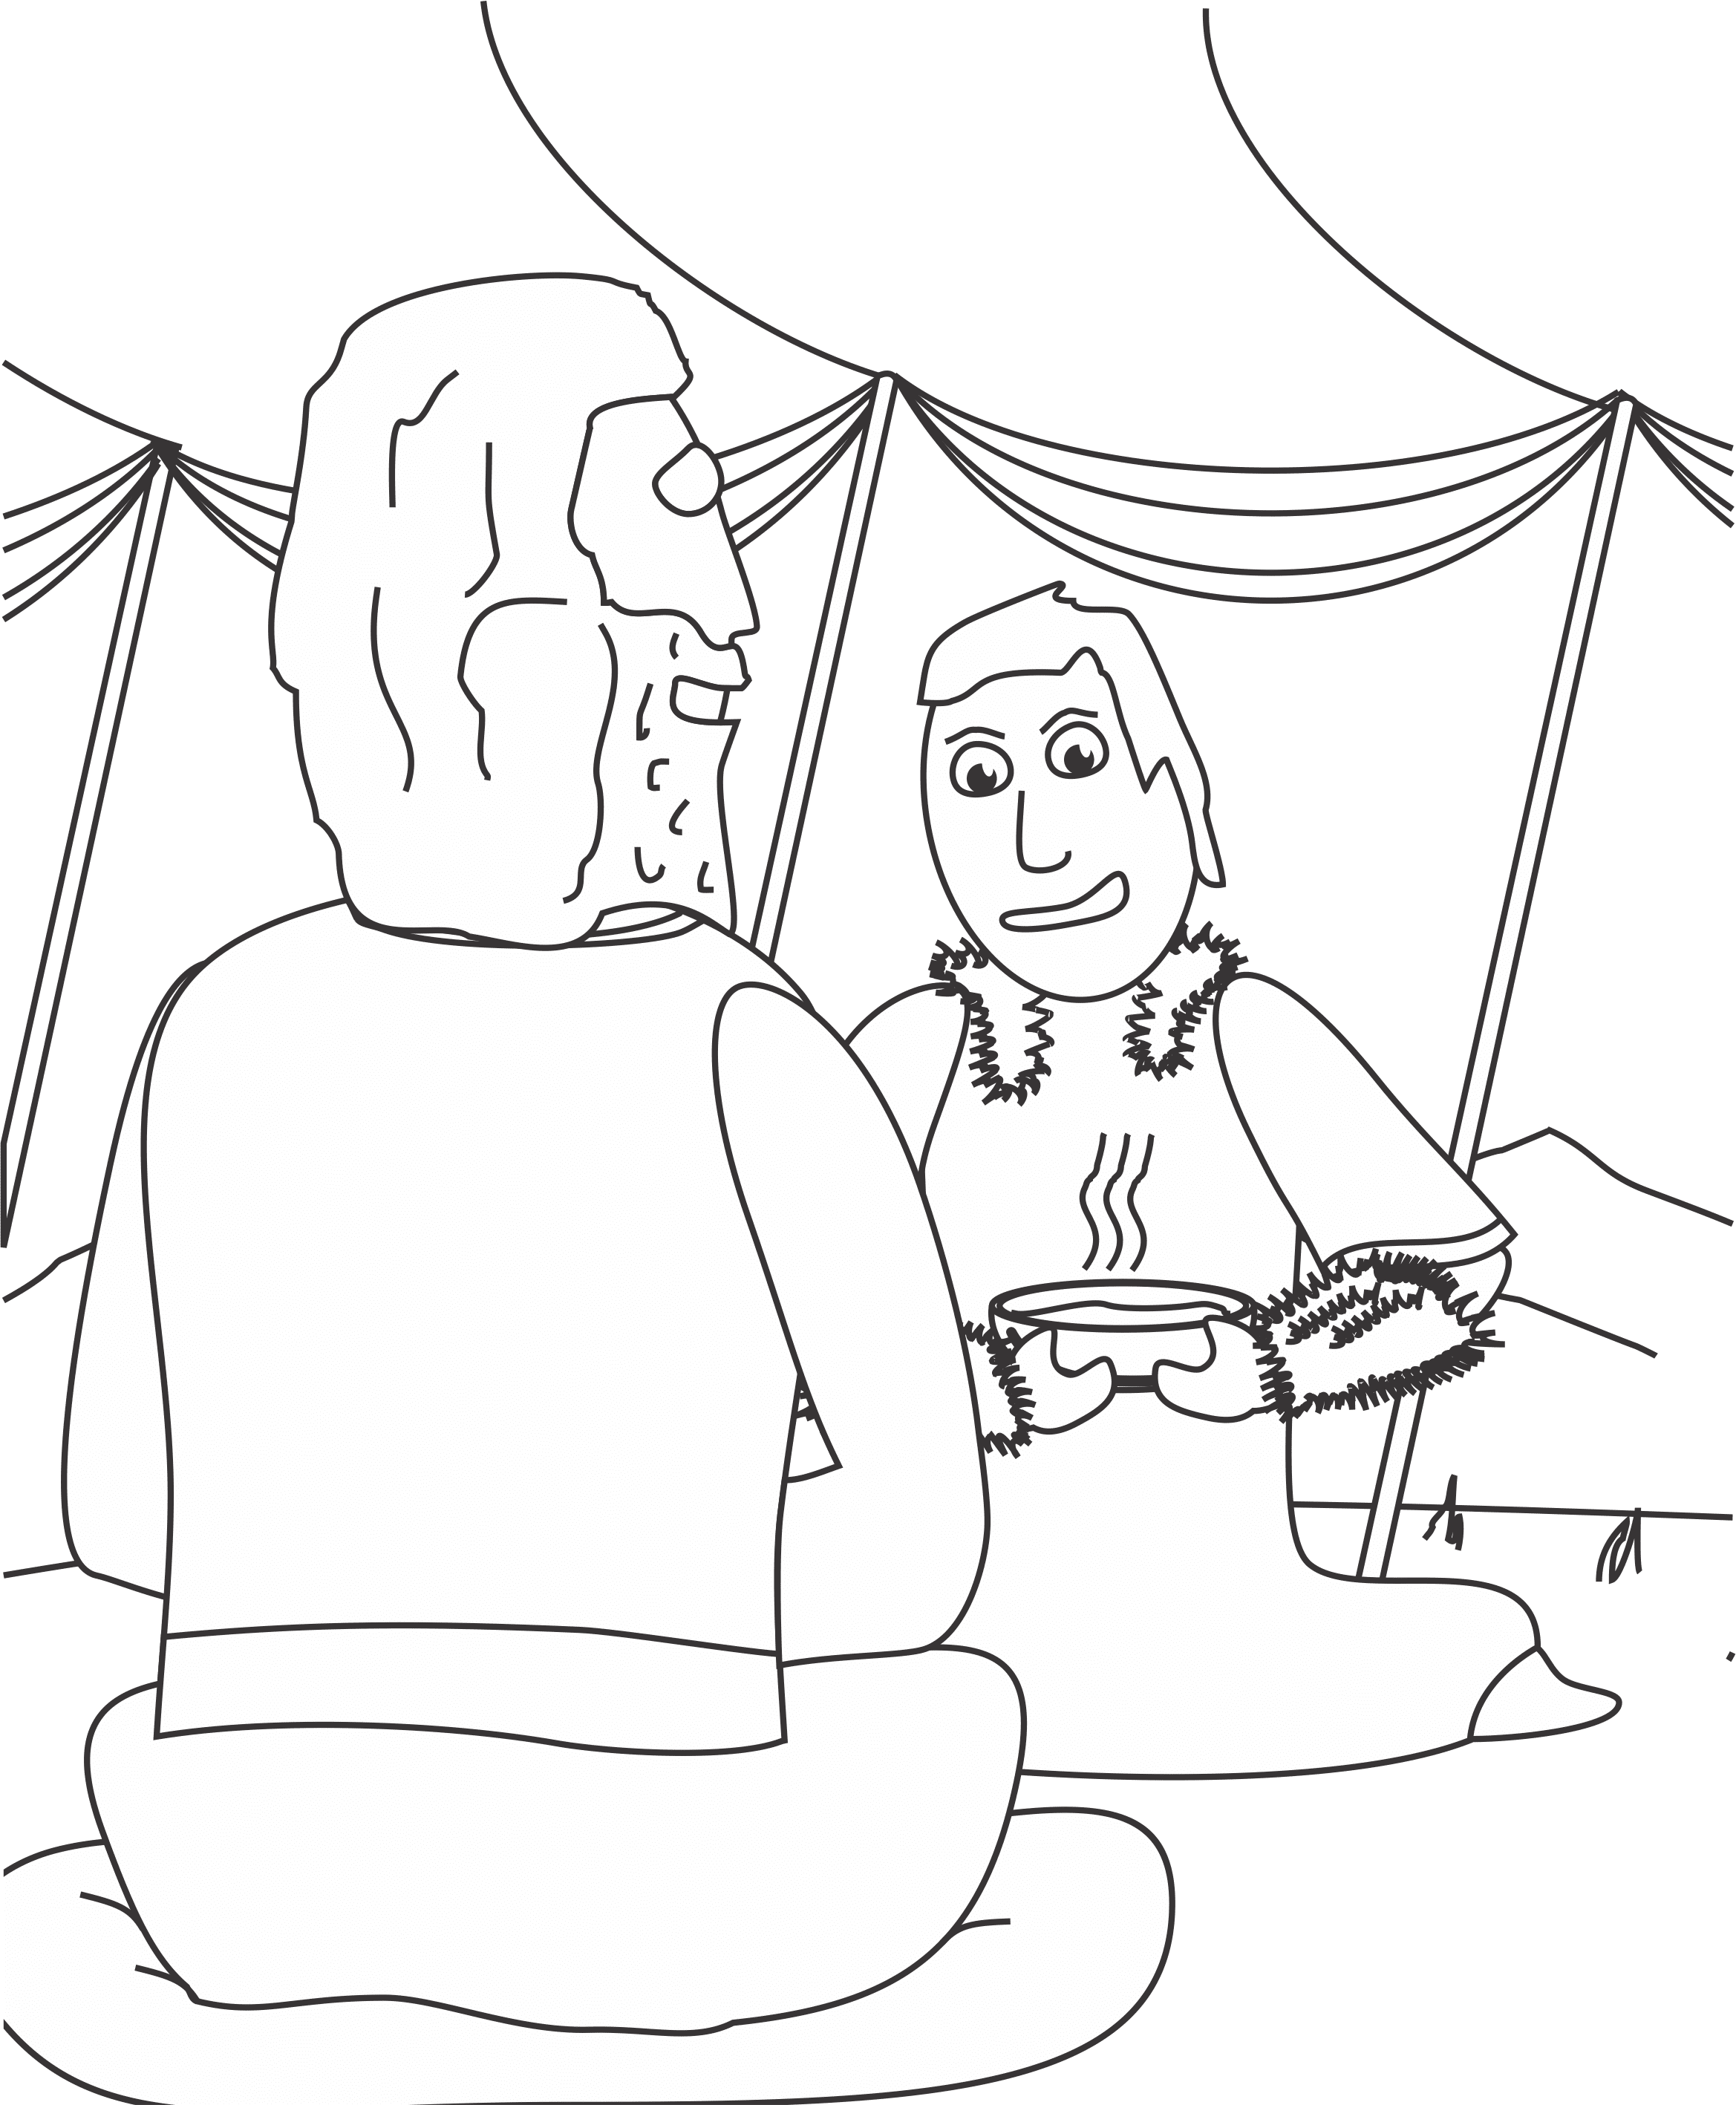 jacob and esau coloring pages jacob and esau printable coloring pages esau and pages coloring jacob 